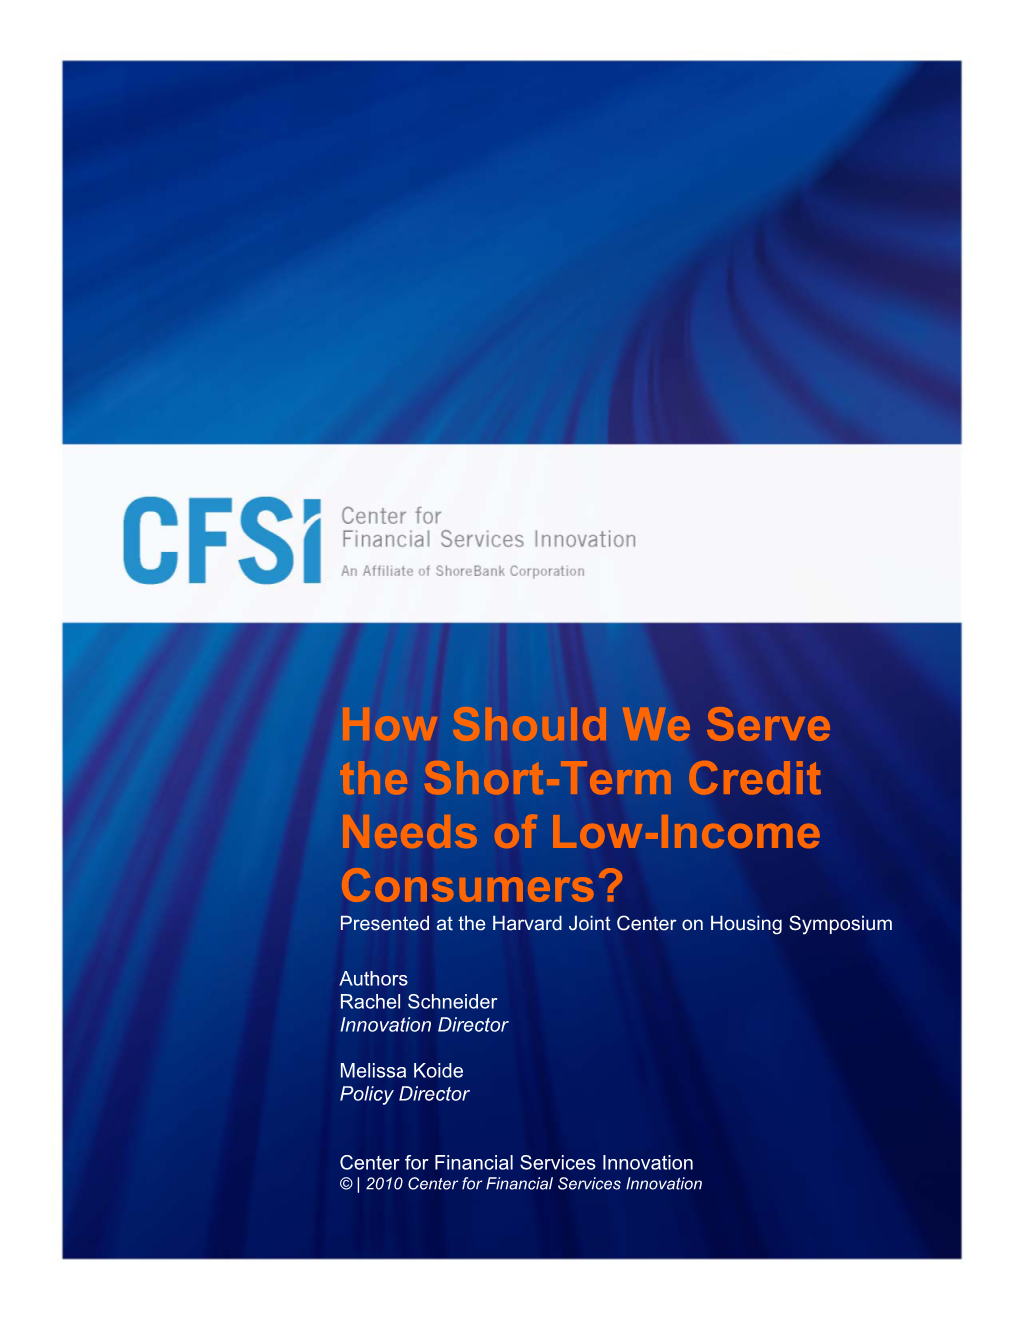 How Should We Serve the Short-Term Credit Needs of Low-Income Consumers? Presented at the Harvard Joint Center on Housing Symposium